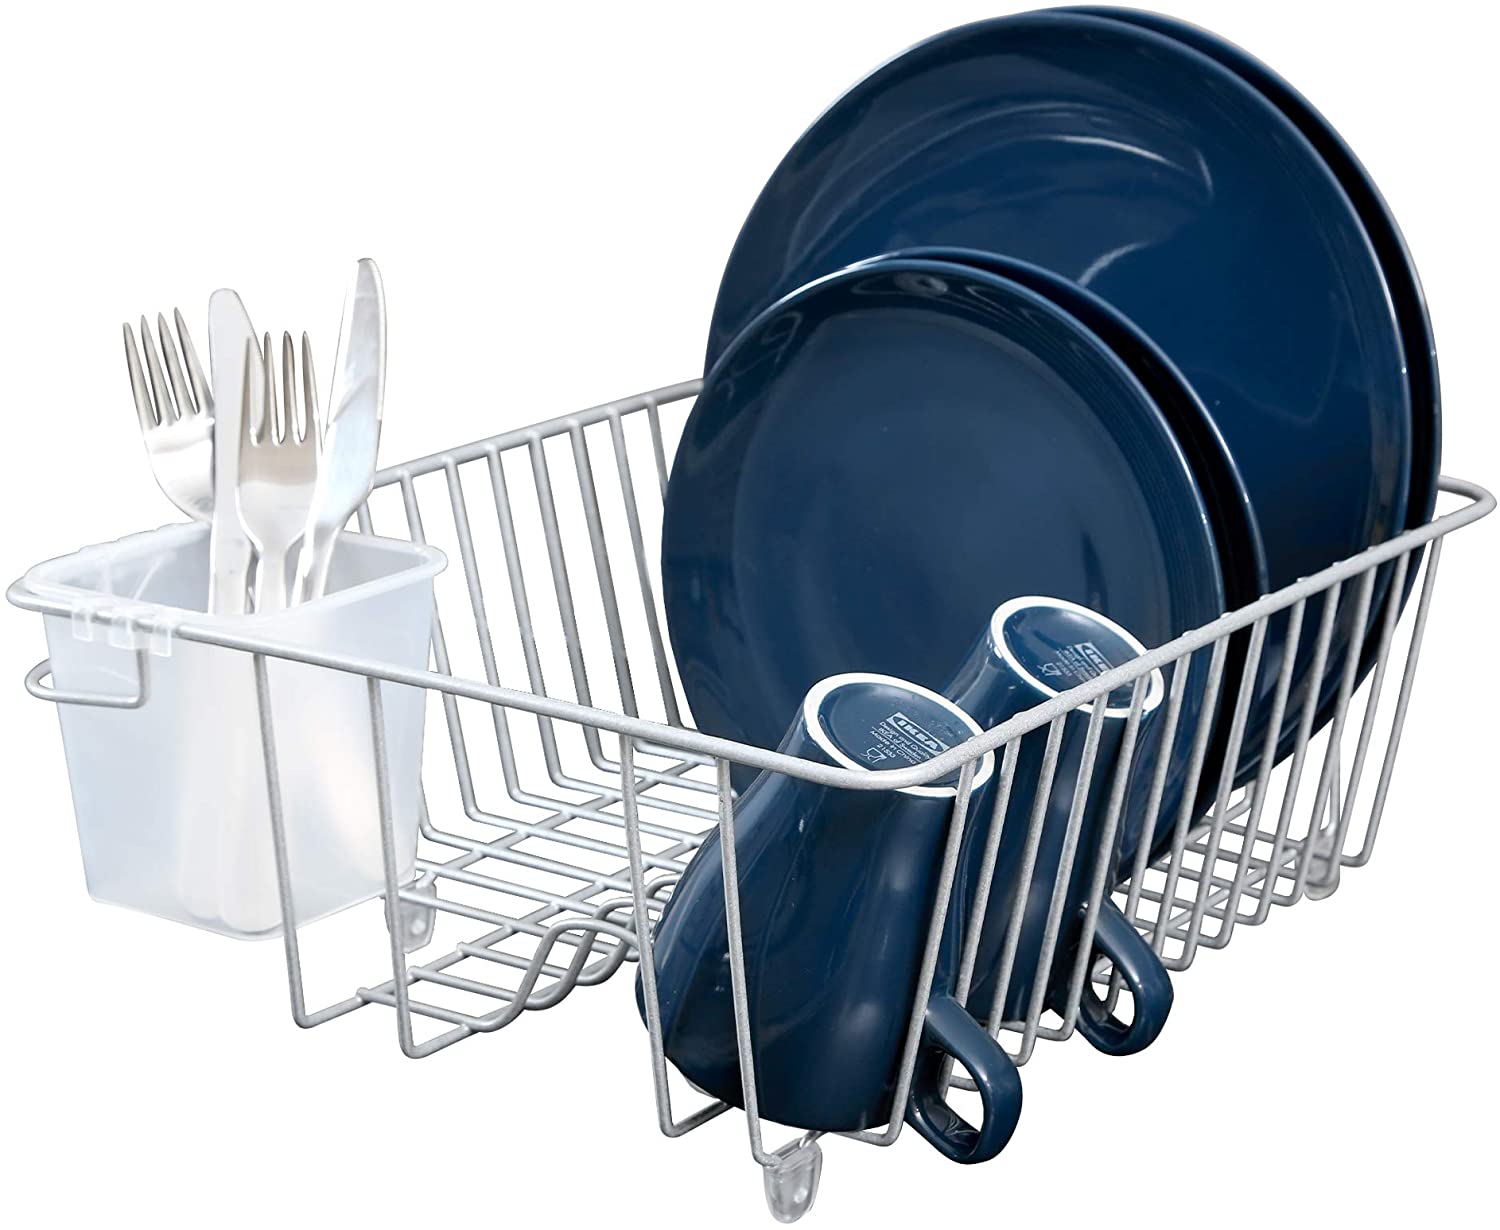 http://www.shopsmartdesign.com/cdn/shop/products/dish-drainer-rack-for-in-sink-or-counter-drying-small-smart-design-kitchen-8116108a12-incrementing-number-888909.jpg?v=1679343219